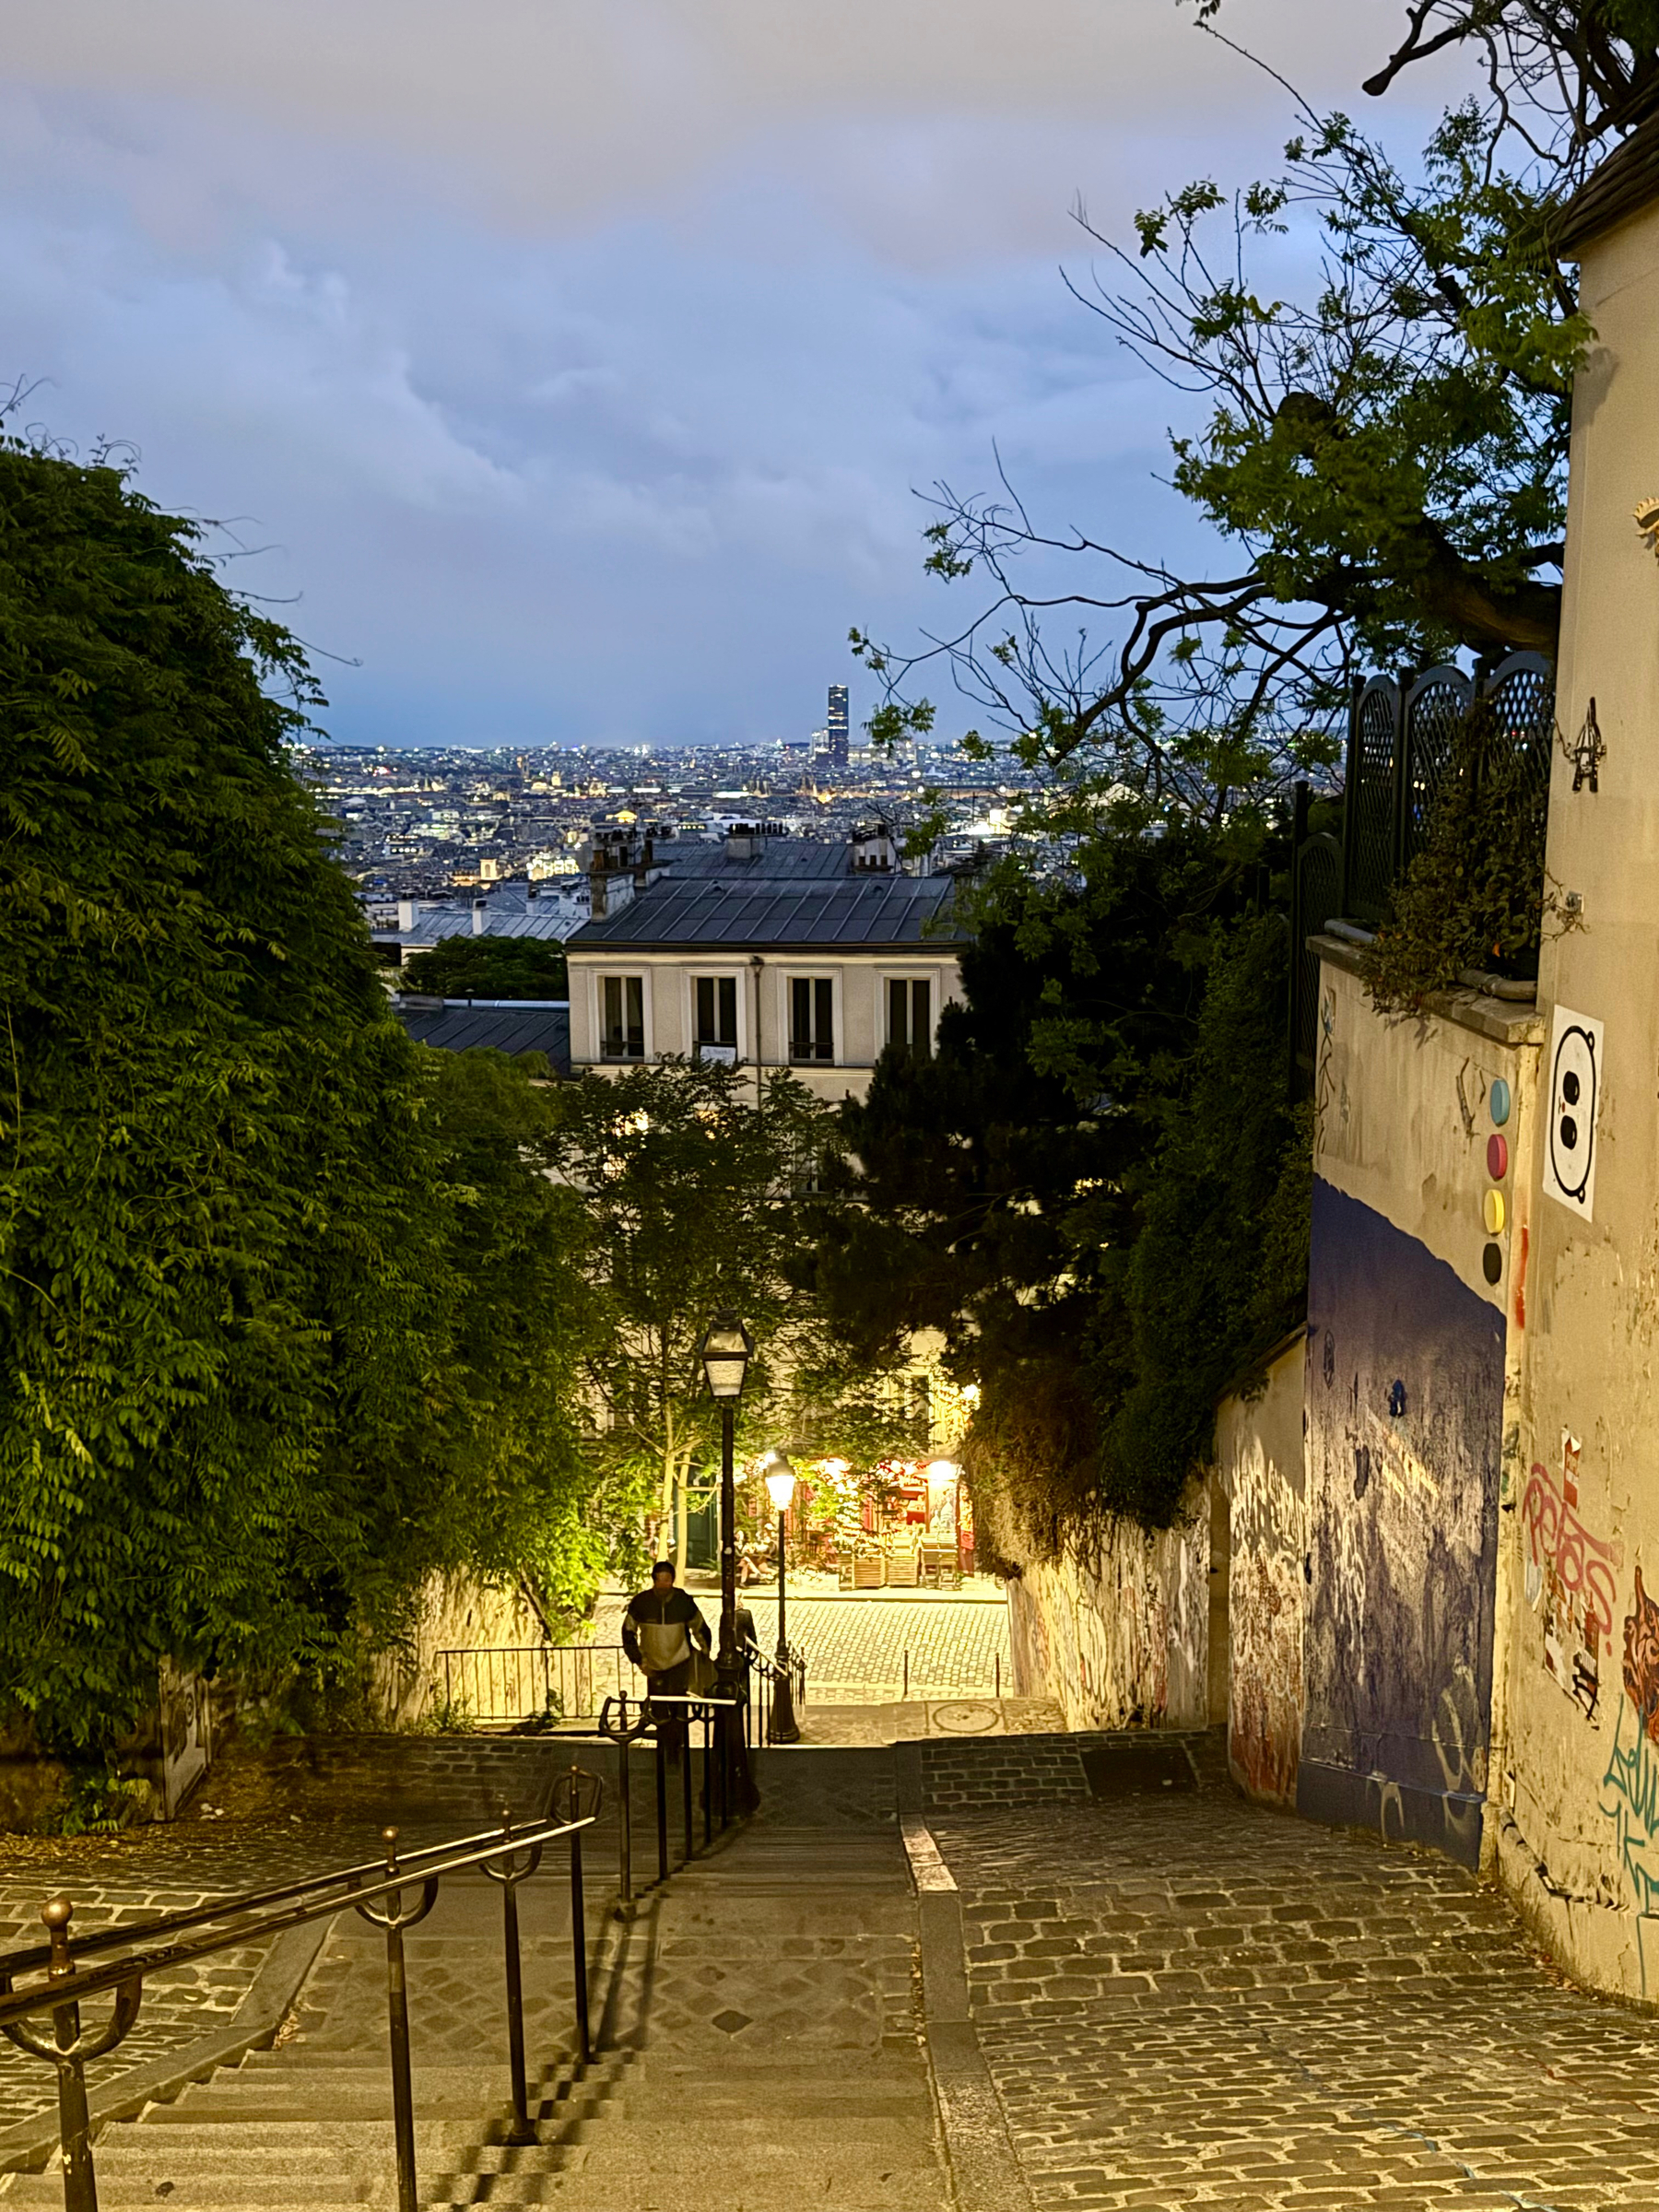 A nighttime view of a cobblestone staircase descending towards a brightly lit street, with city lights in the background, flanked by trees and walls with graffiti, and a person walking up the stairs.